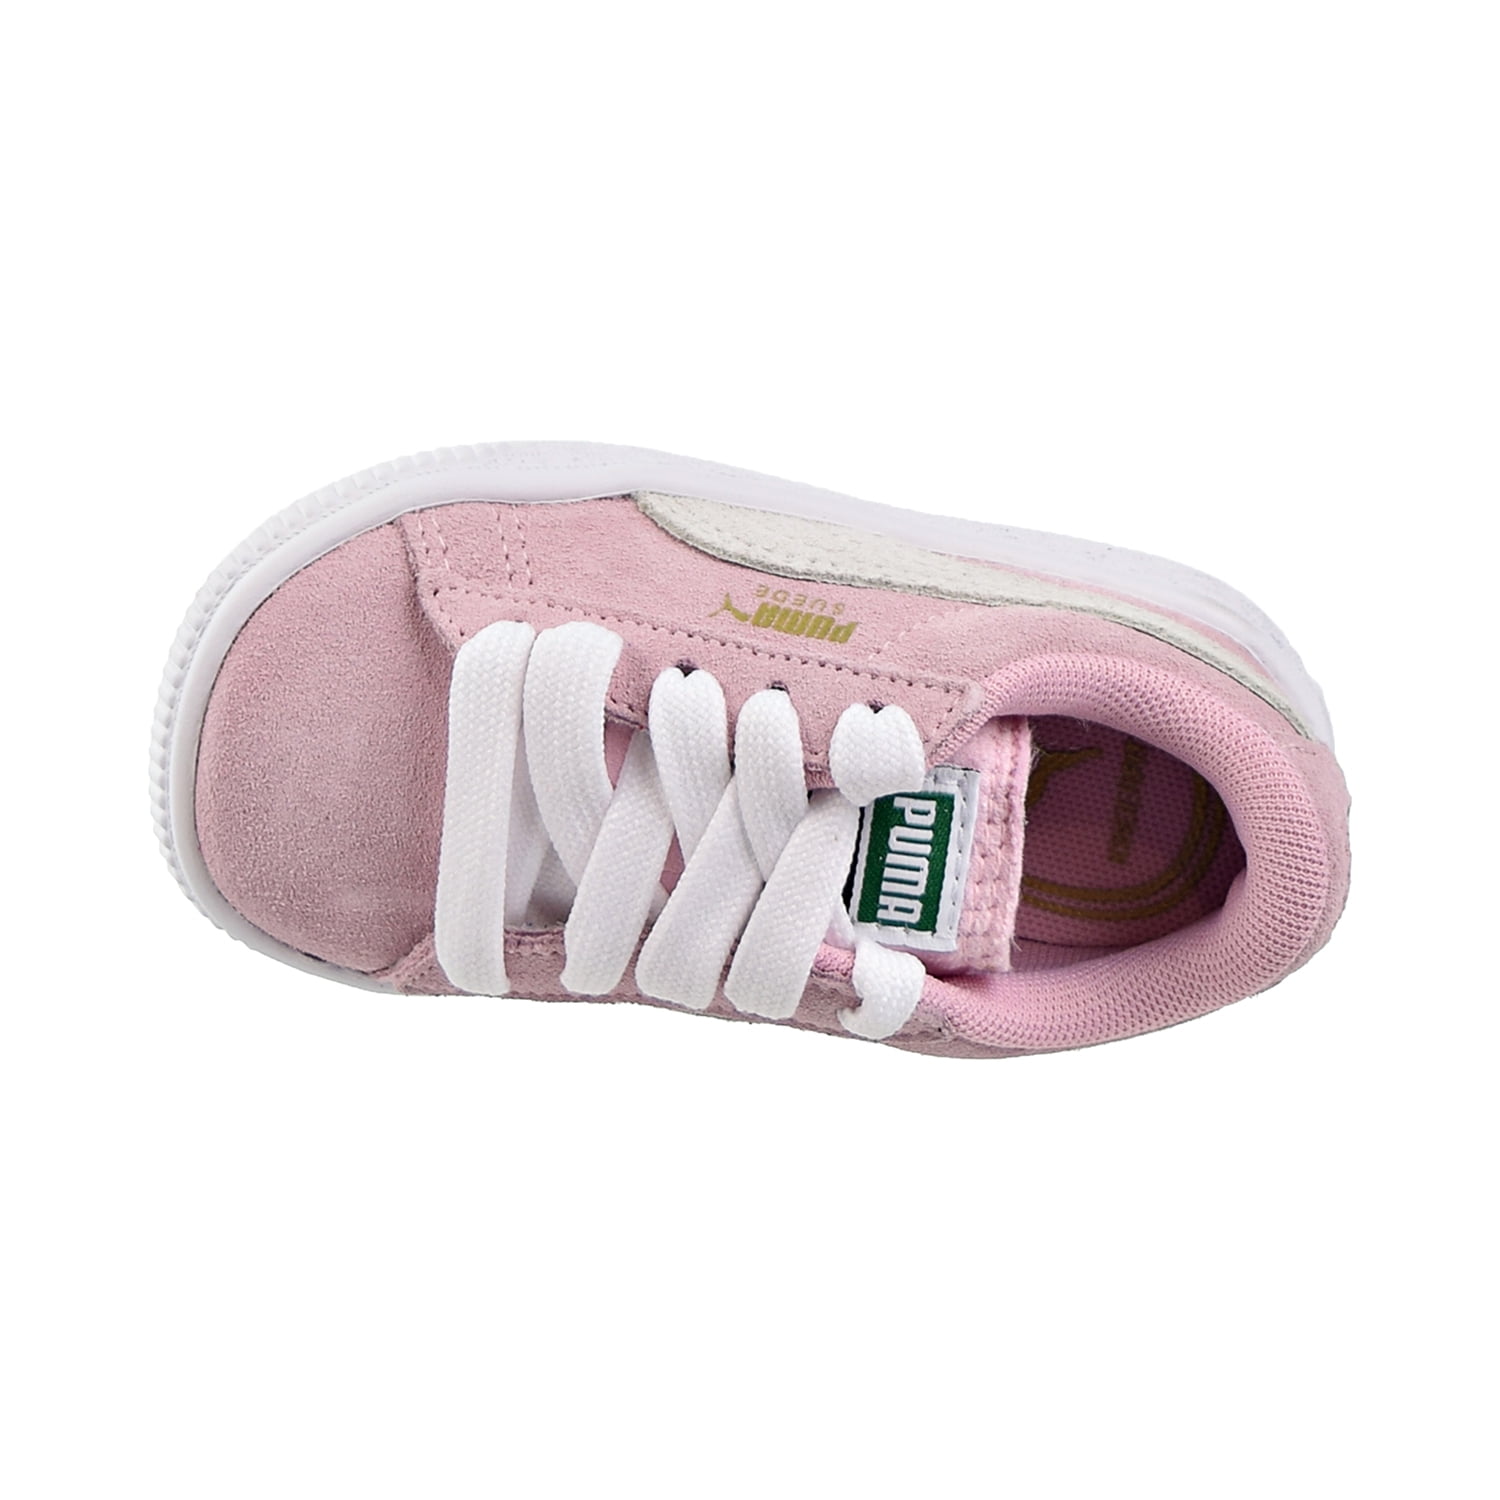 Suede INF Toddlers Shoes Pink Lady/Puma White 353636-52 - Walmart.com